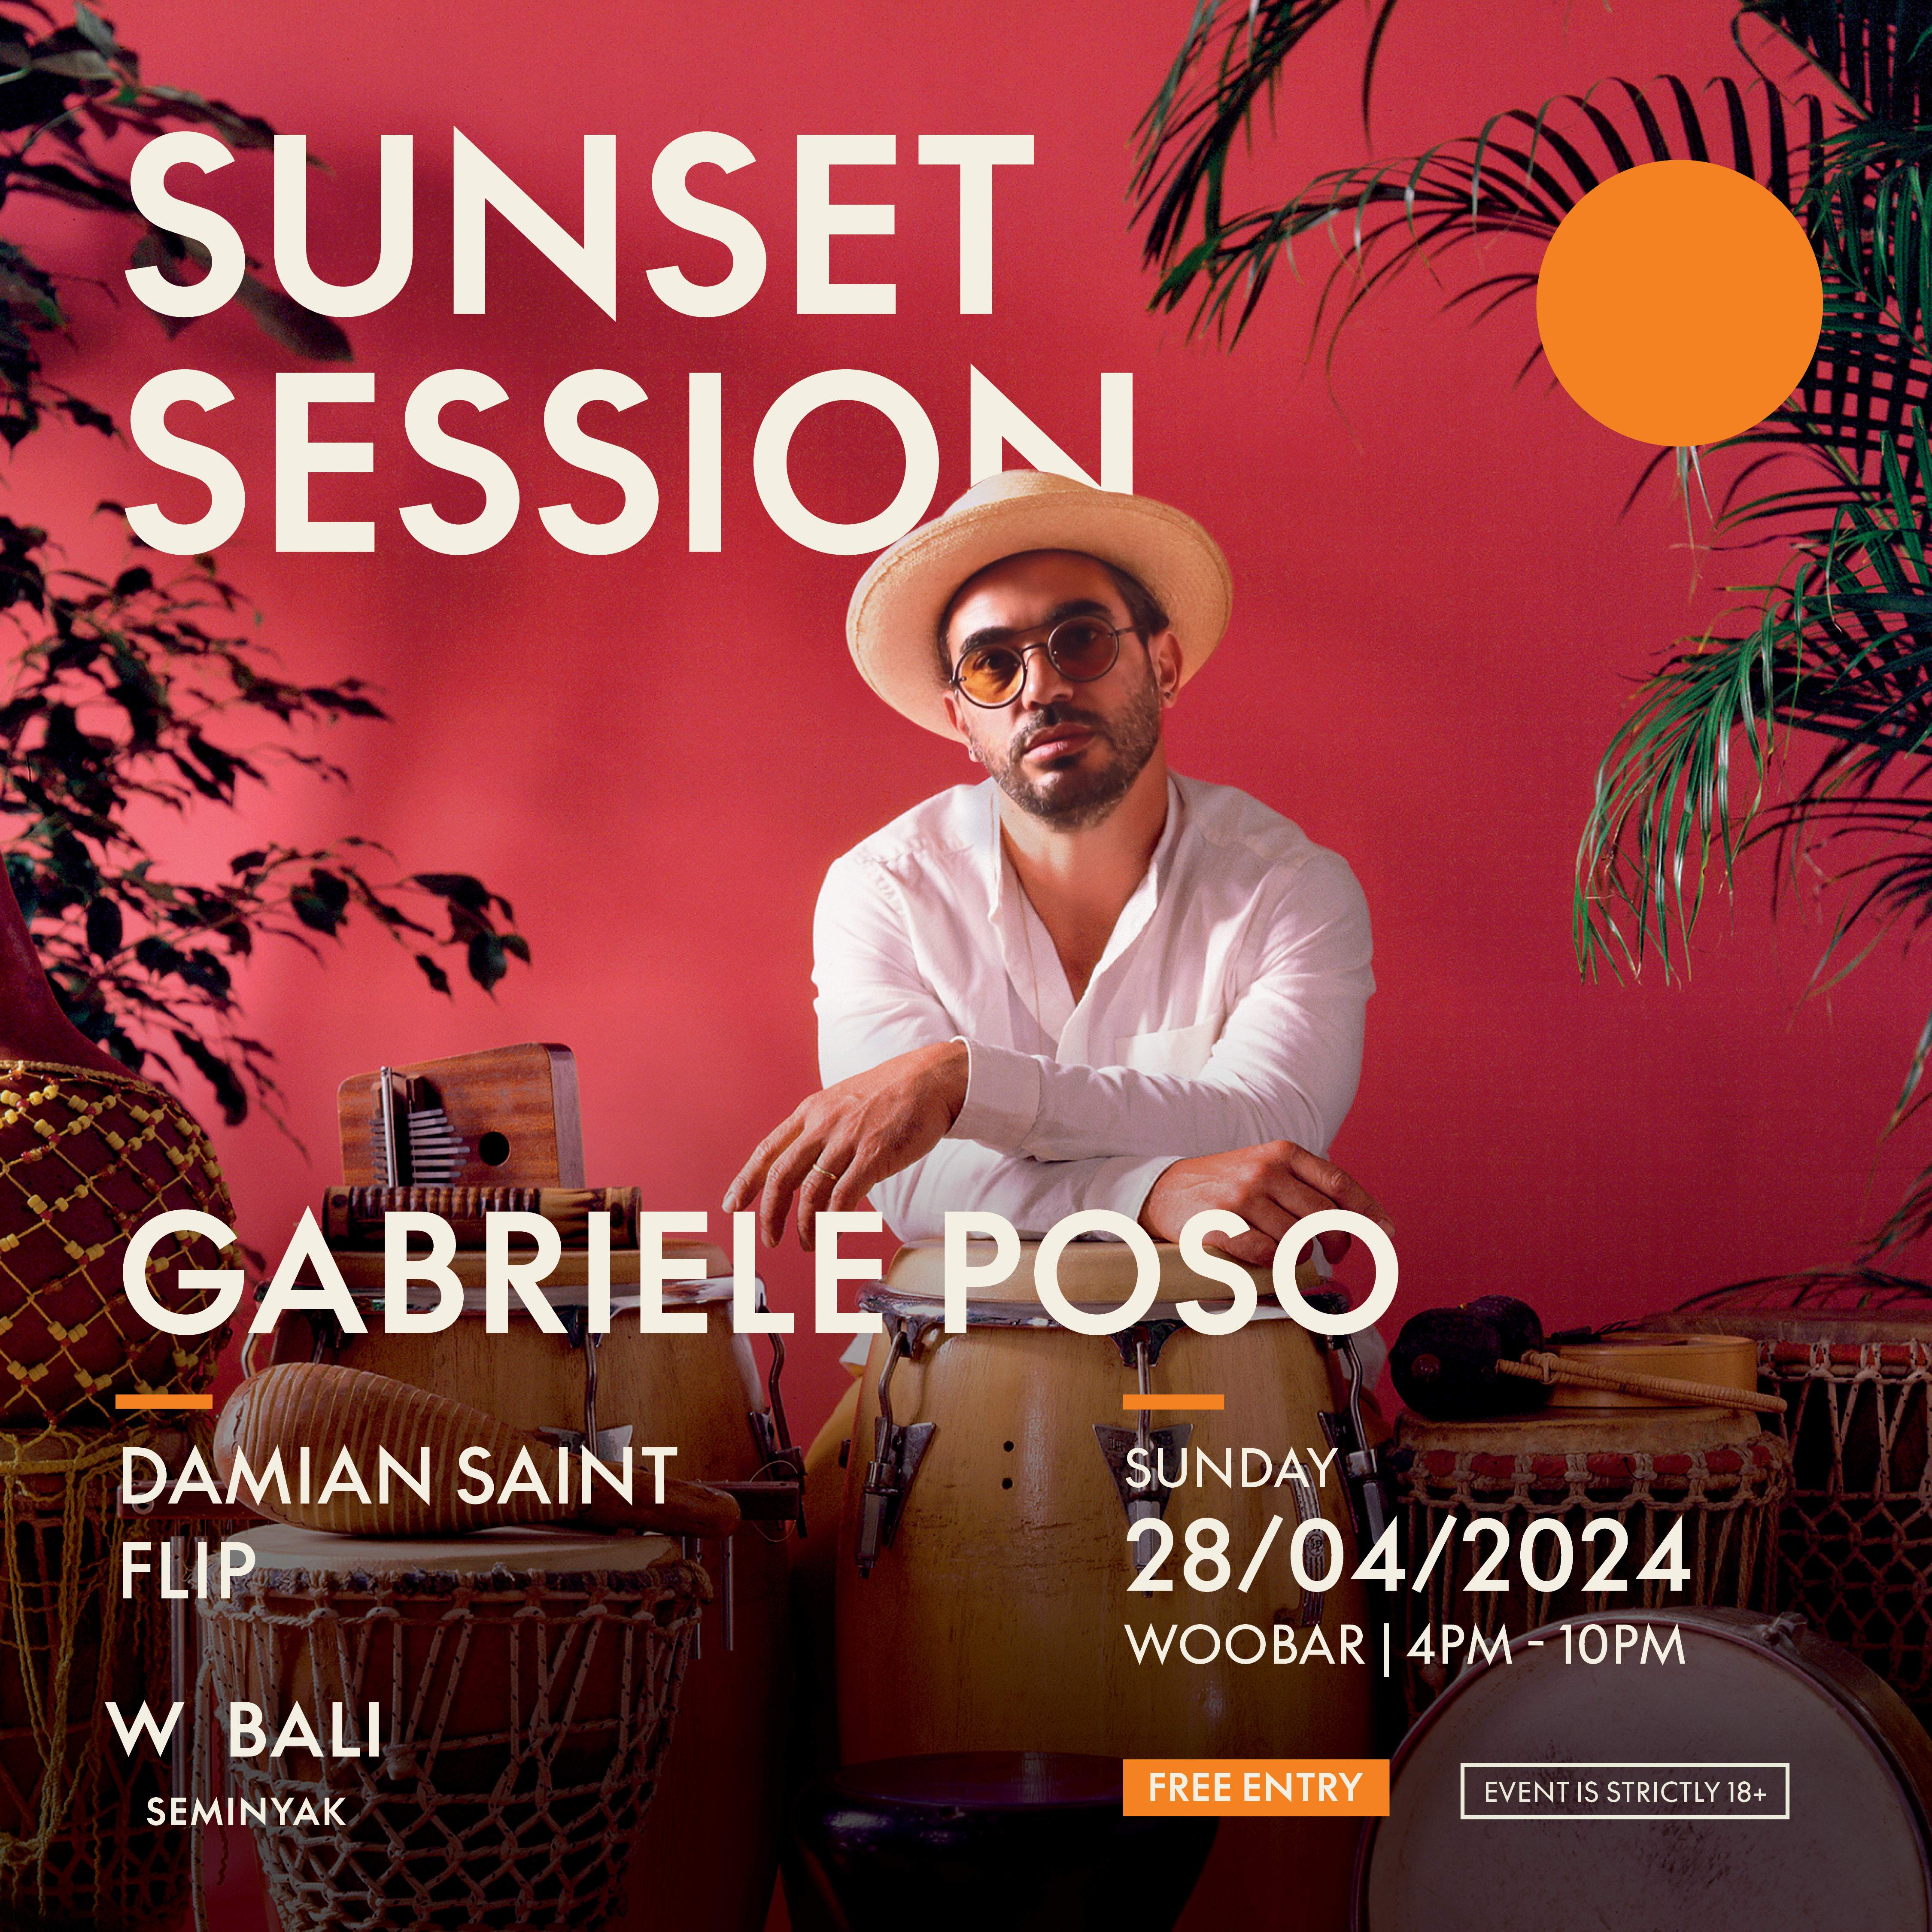 Sunset Session featuring Gabriele Poso - フライヤー表